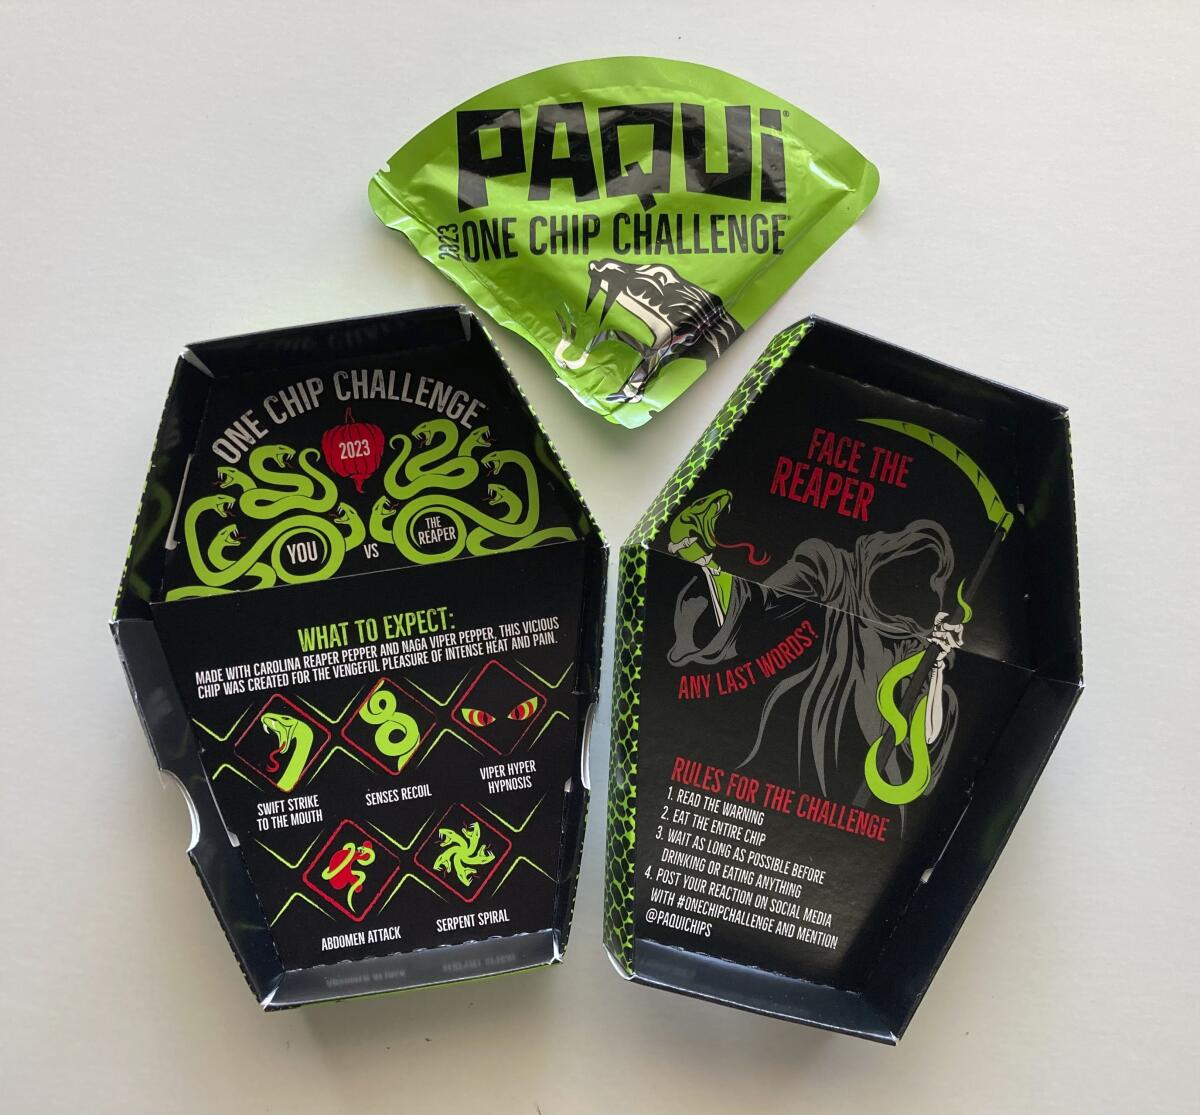 A package of Paqui OneChipChallenge spicy tortilla chips